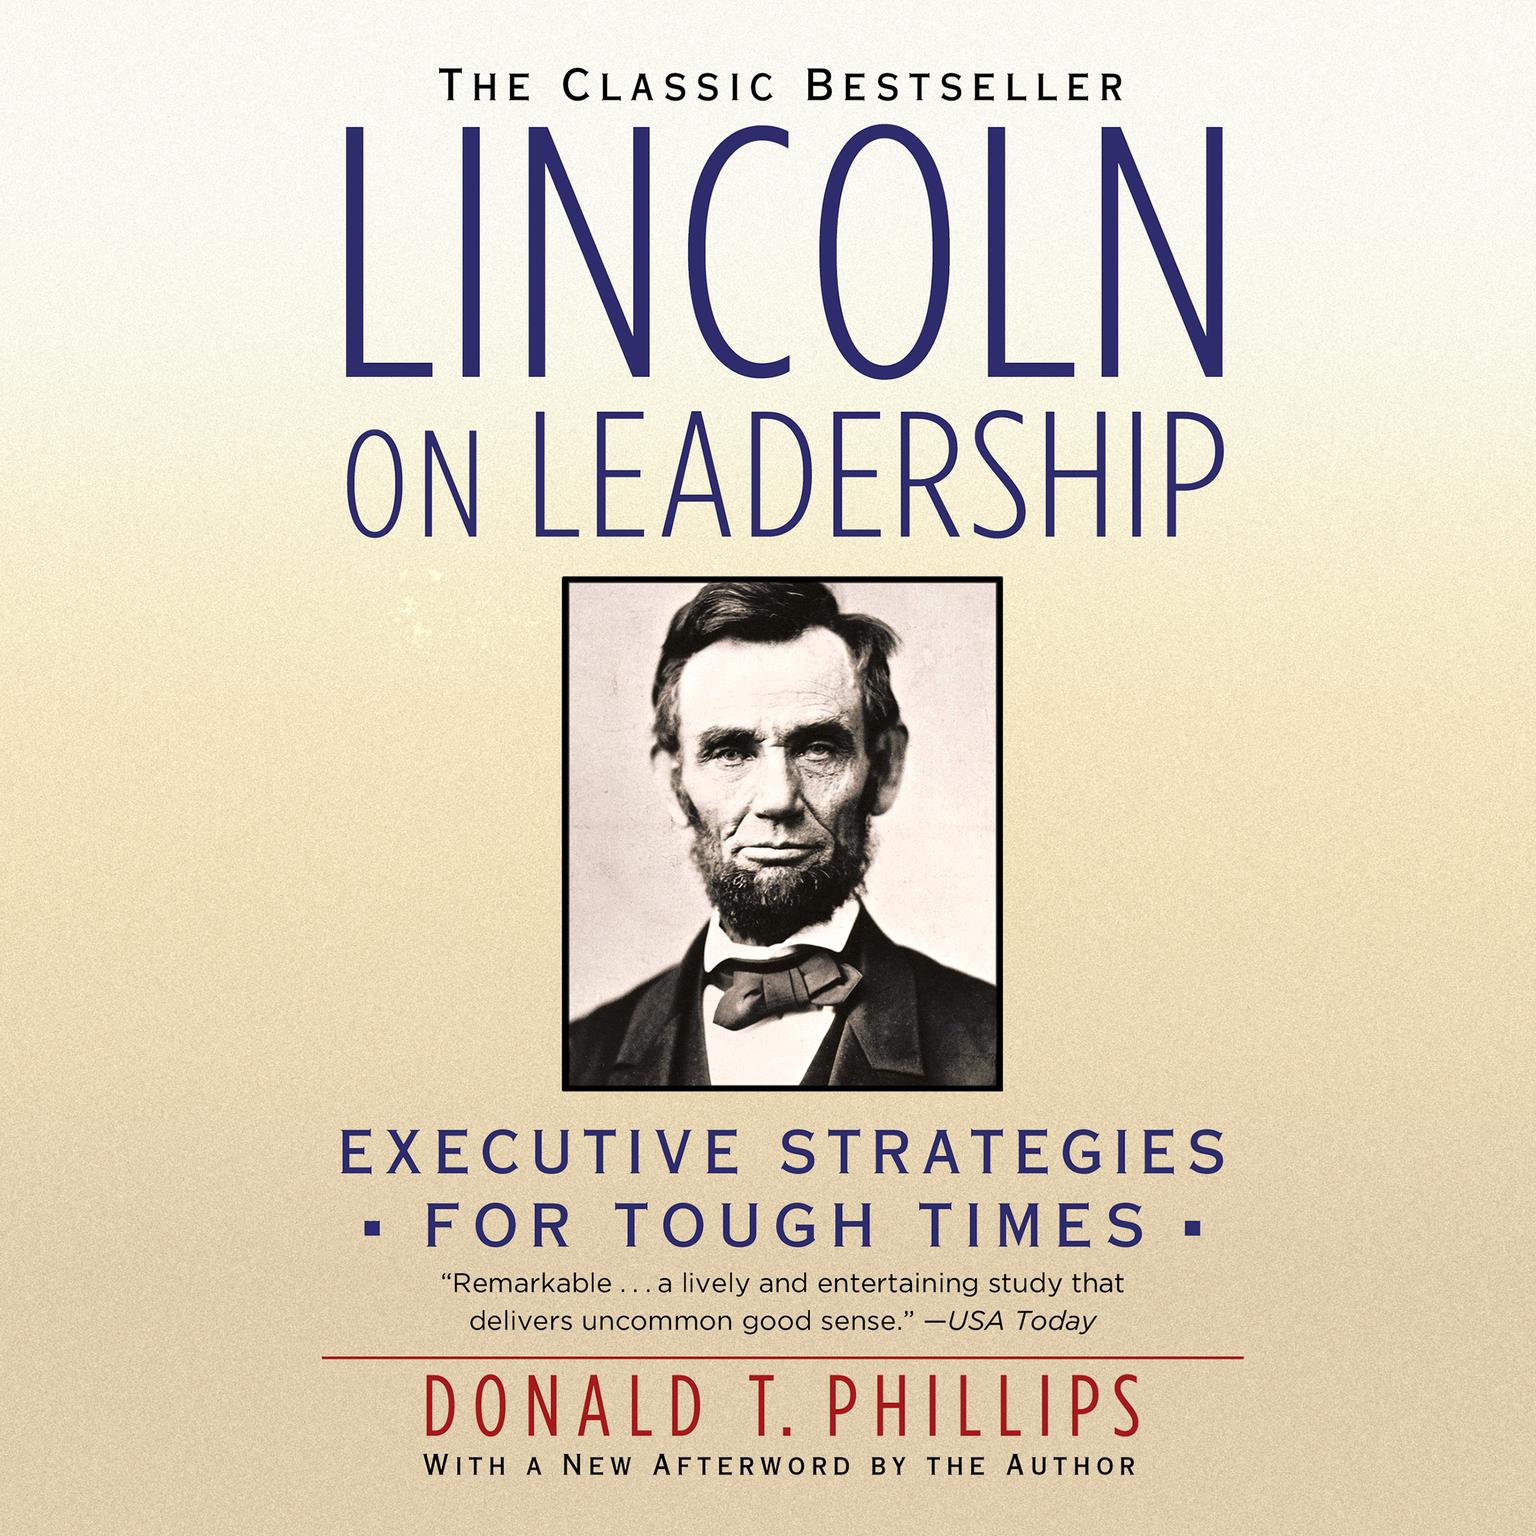 Lincoln on Leadership: Executive Strategies for Tough Times Audiobook, by Donald T. Phillips